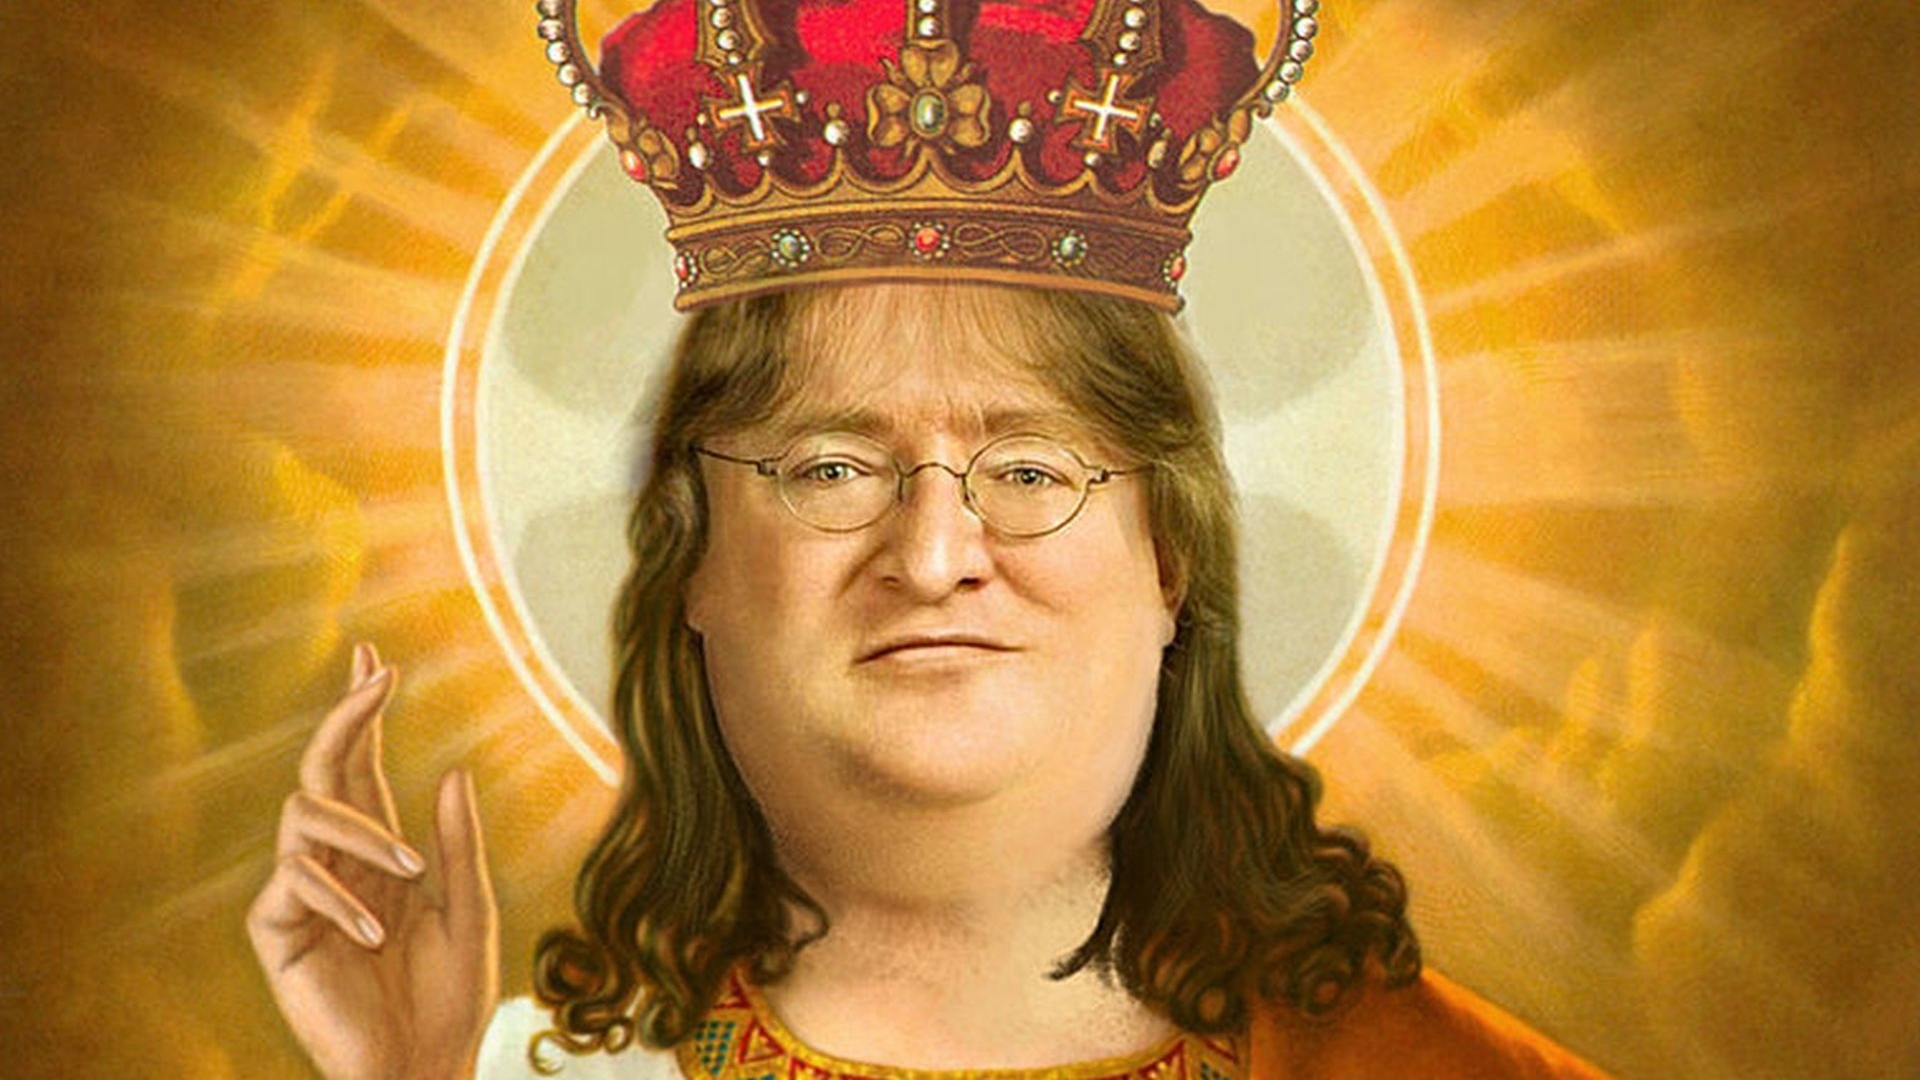 The Valve office has a floor-to-ceiling picture of the Lord Gaben meme